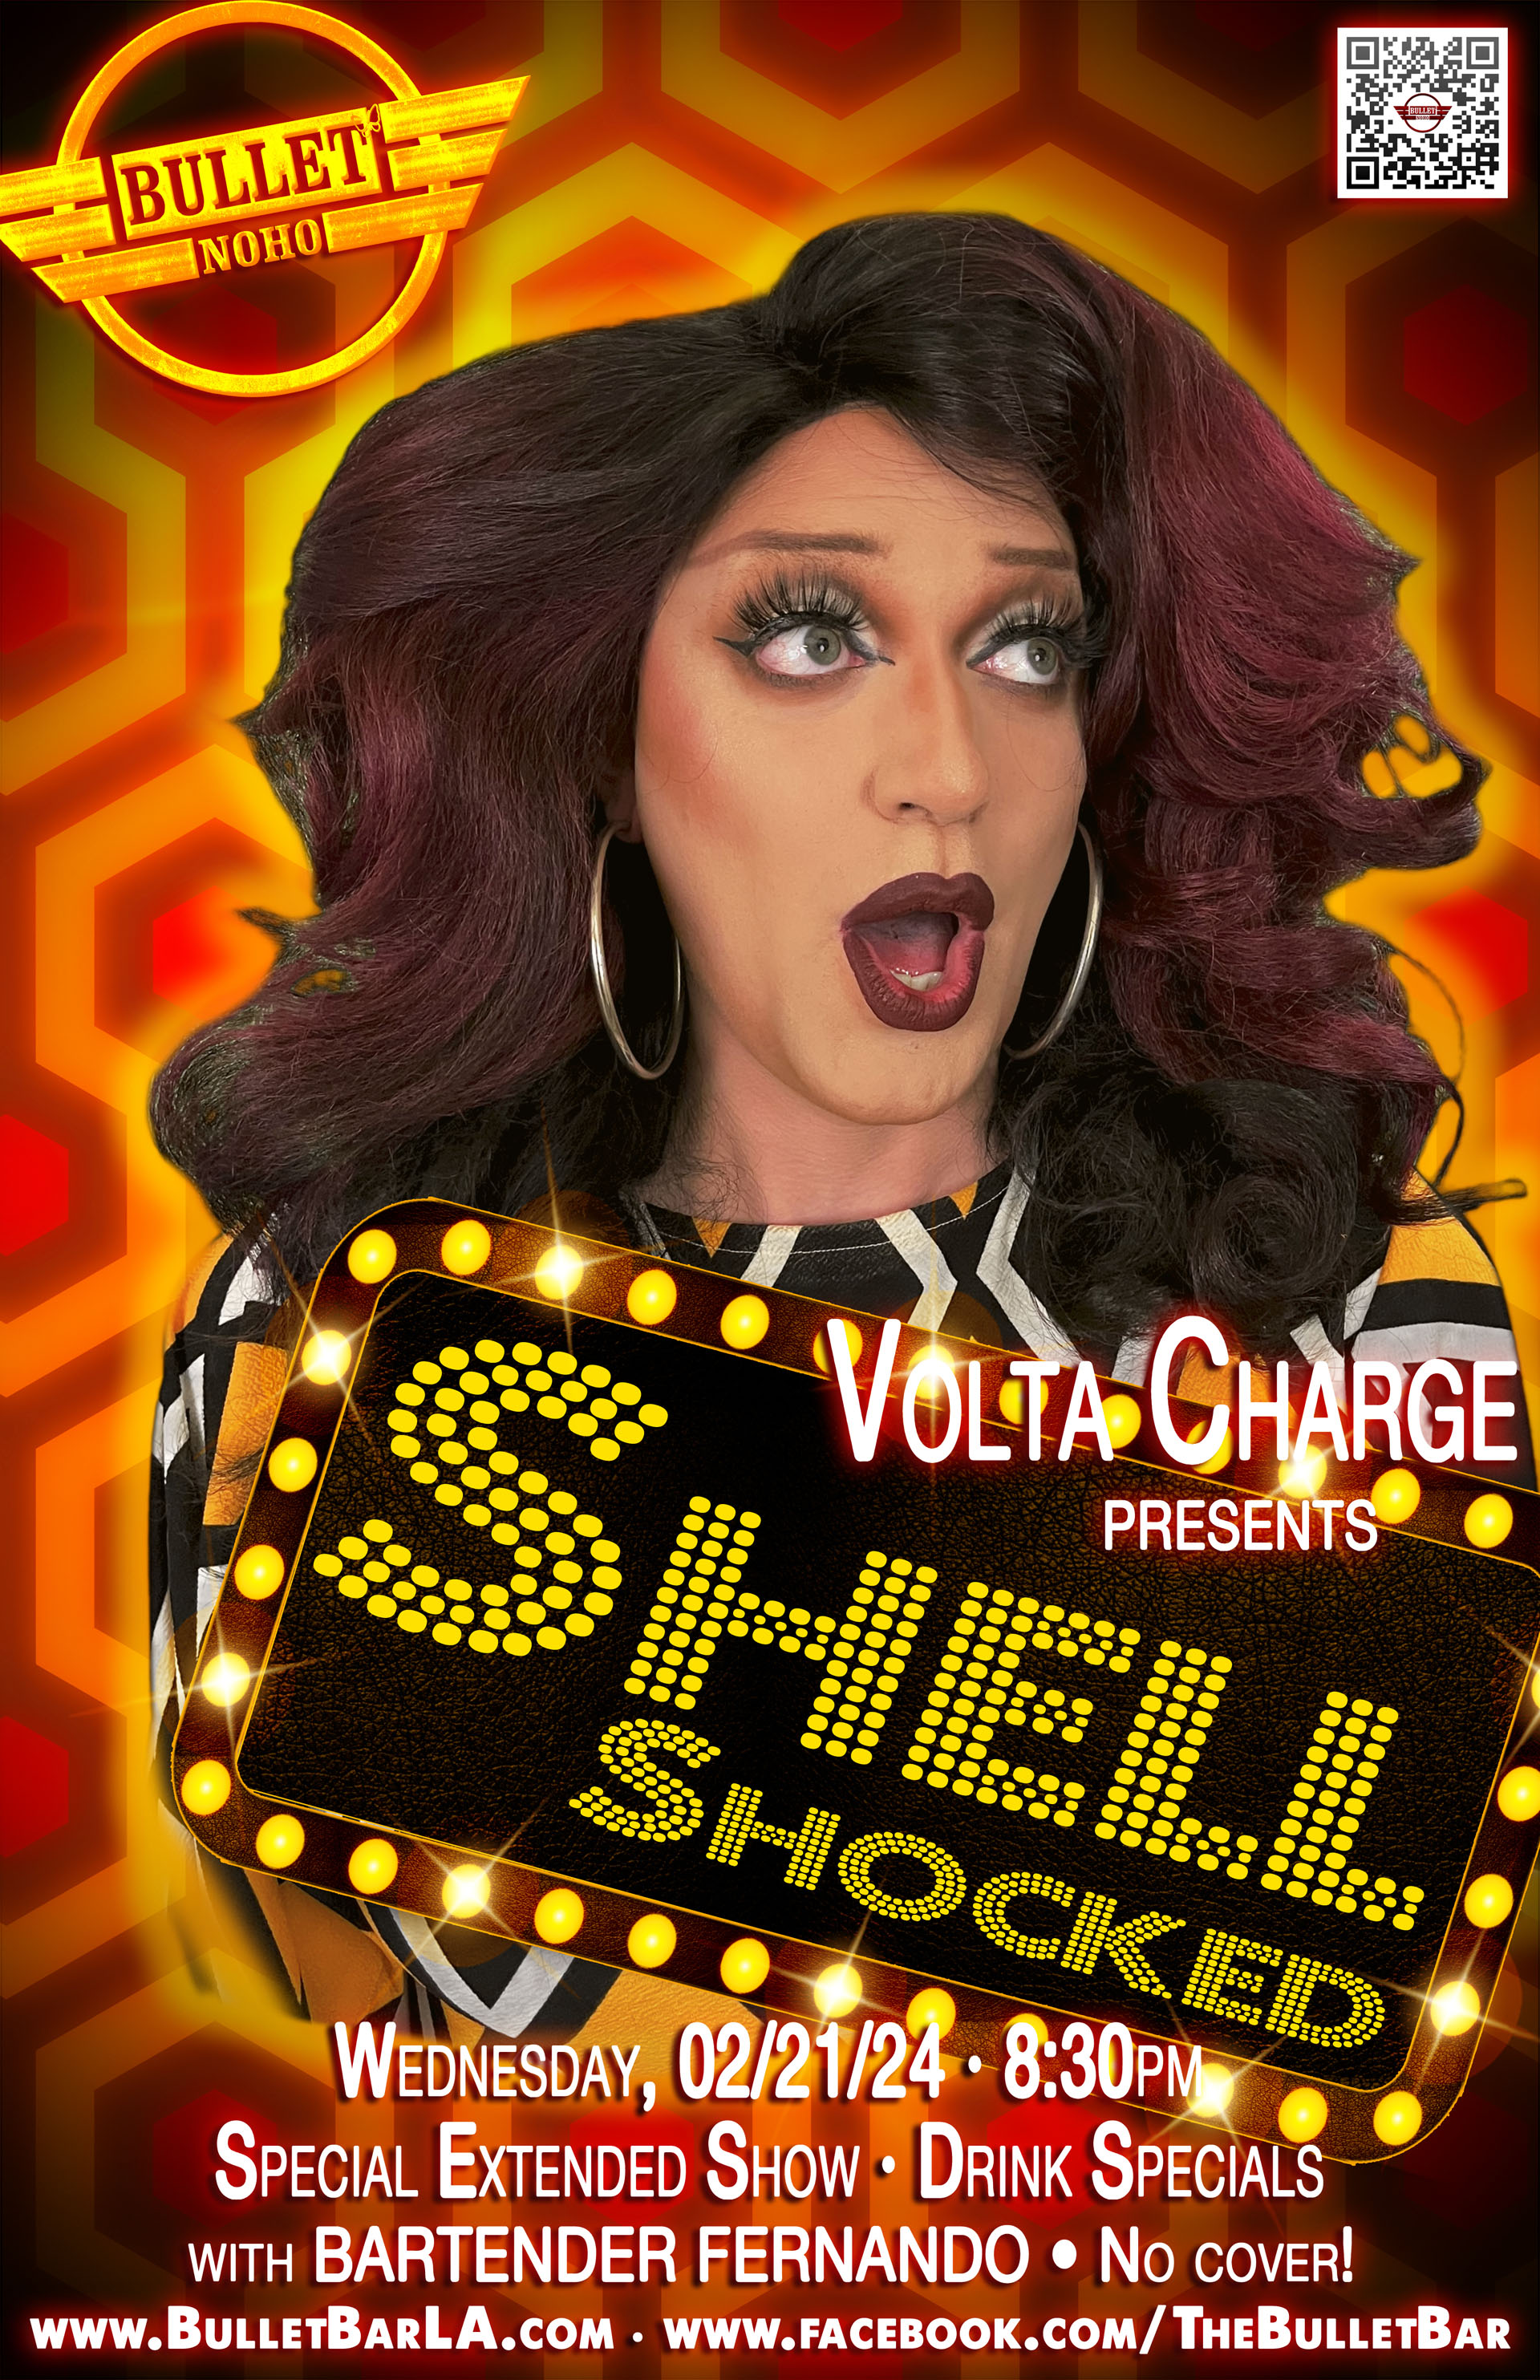 THE BULLET BAR & VOLTA CHARGE Present SHELL SHOCKED: Wednesday, 02/21/24 at 8:30 PM! No Cover!